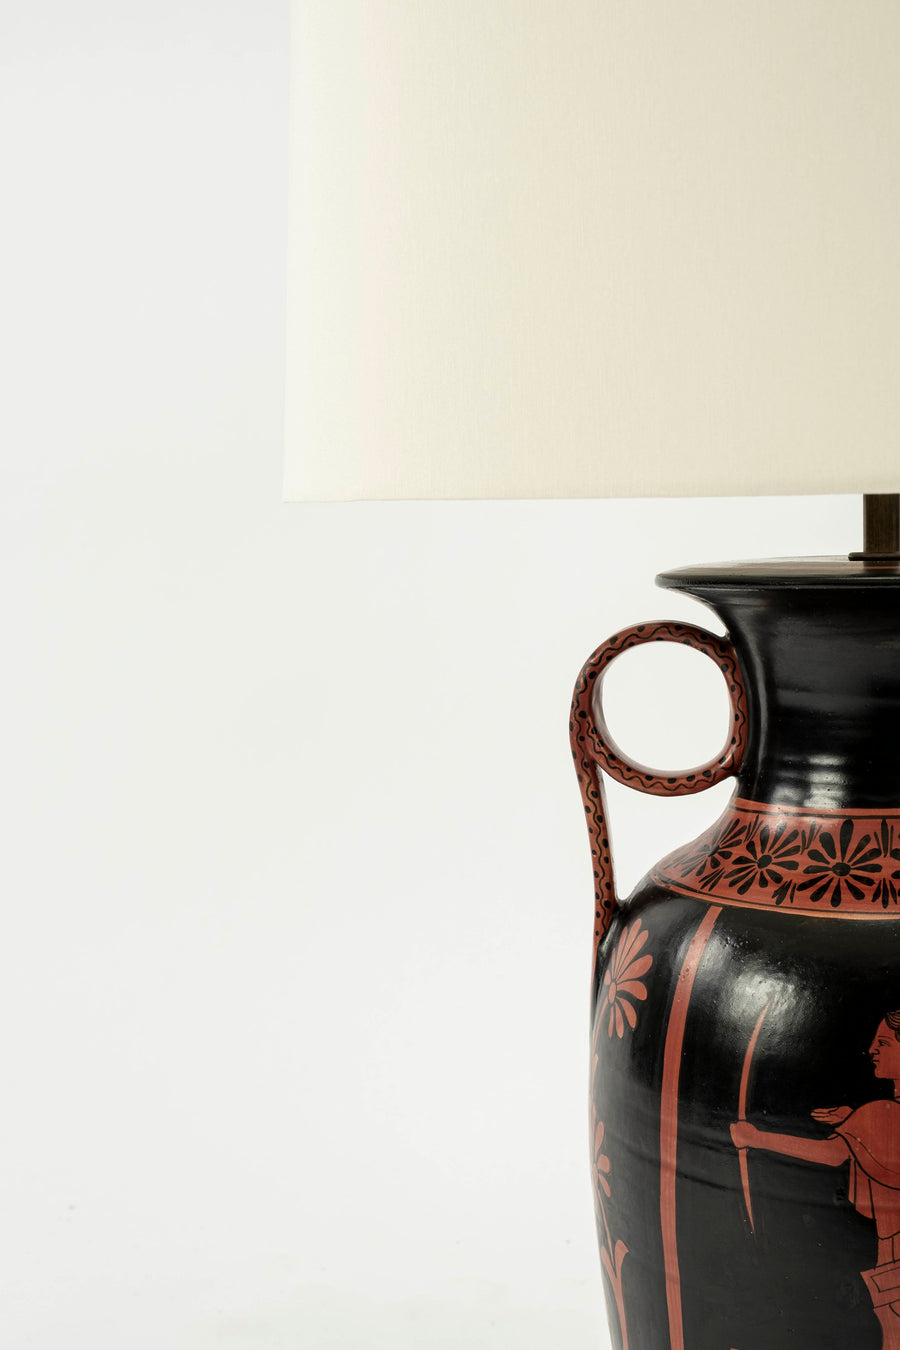 Up-close on one of the two decorative pieces attached to each urn lamp's base.